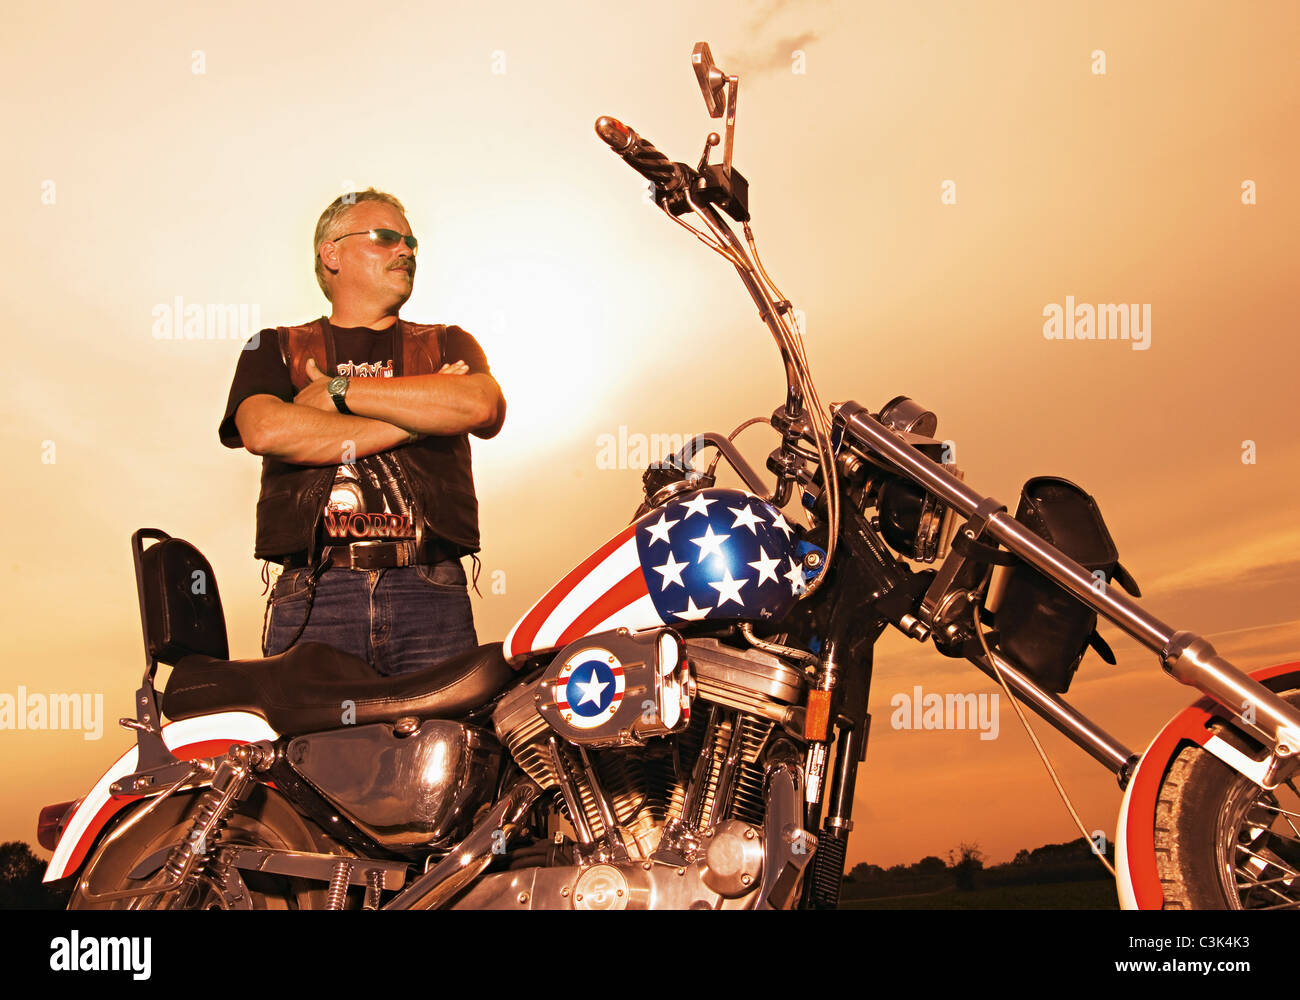 Germany, Mature motorcyclist with motorcycle at dusk Stock Photo